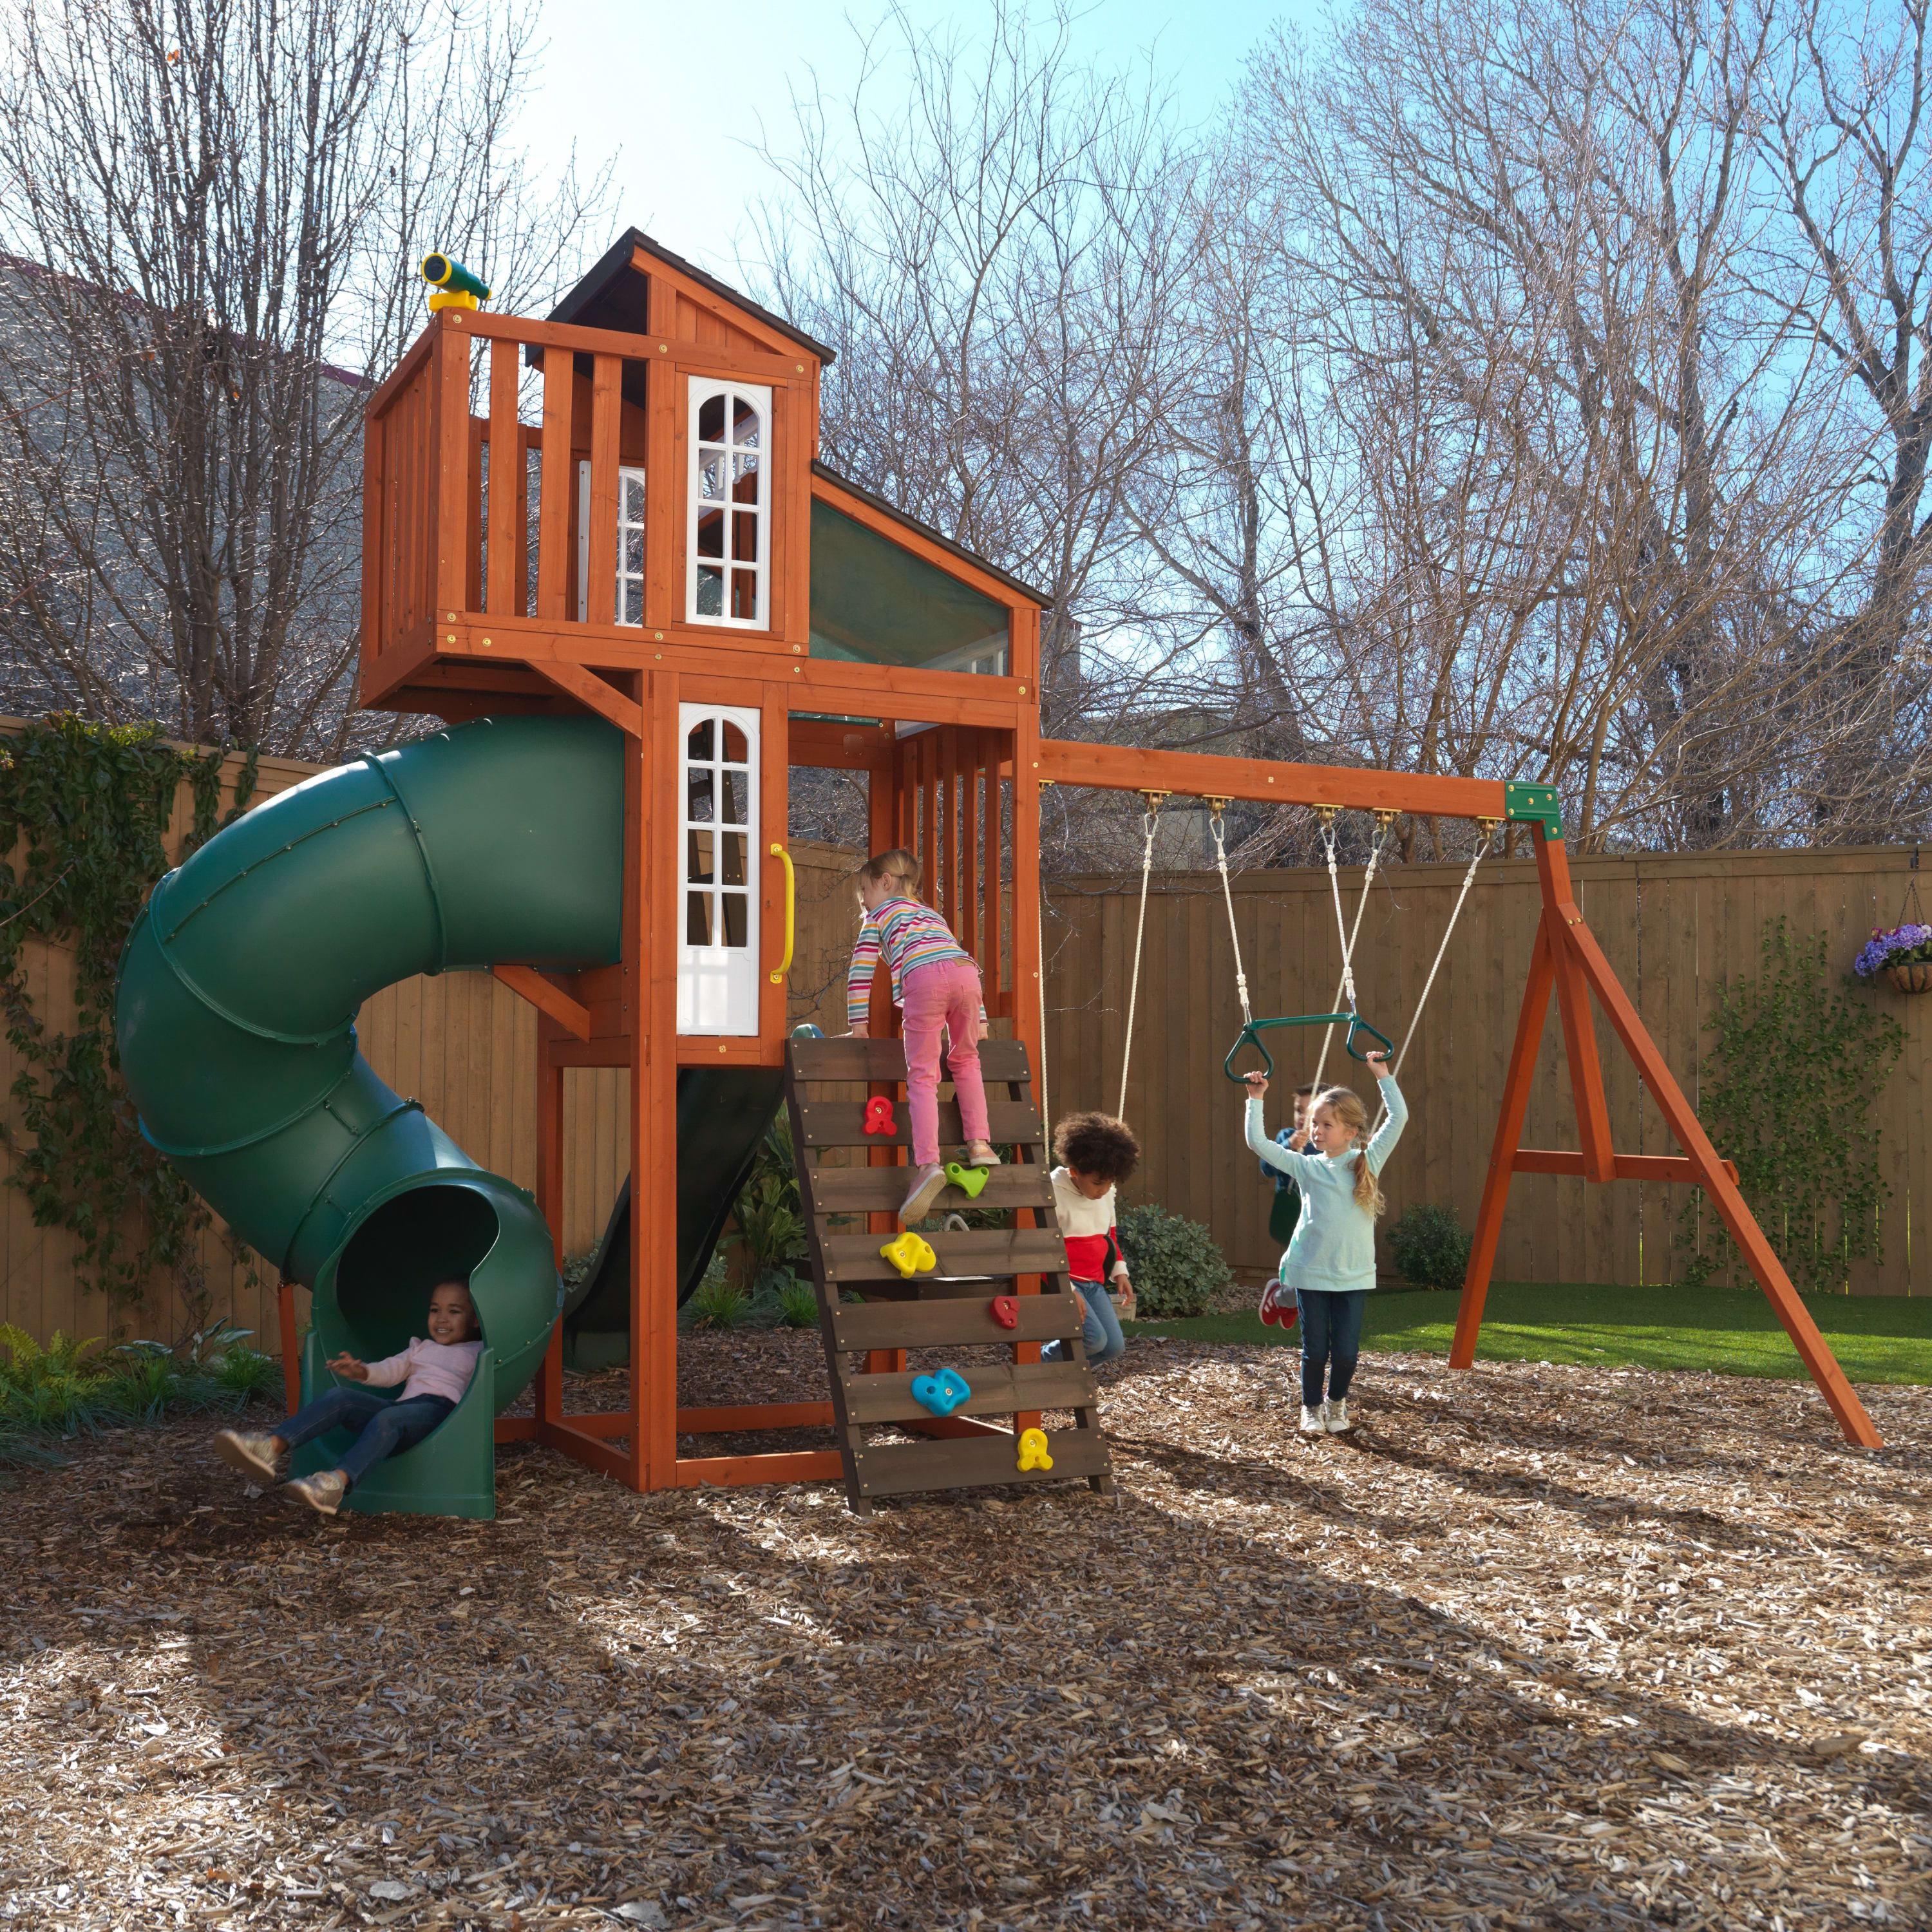 KidKraft Austin Wooden Outdoor Swing Set with Slides, Swings, Kitchen and Rock Wall - image 8 of 27